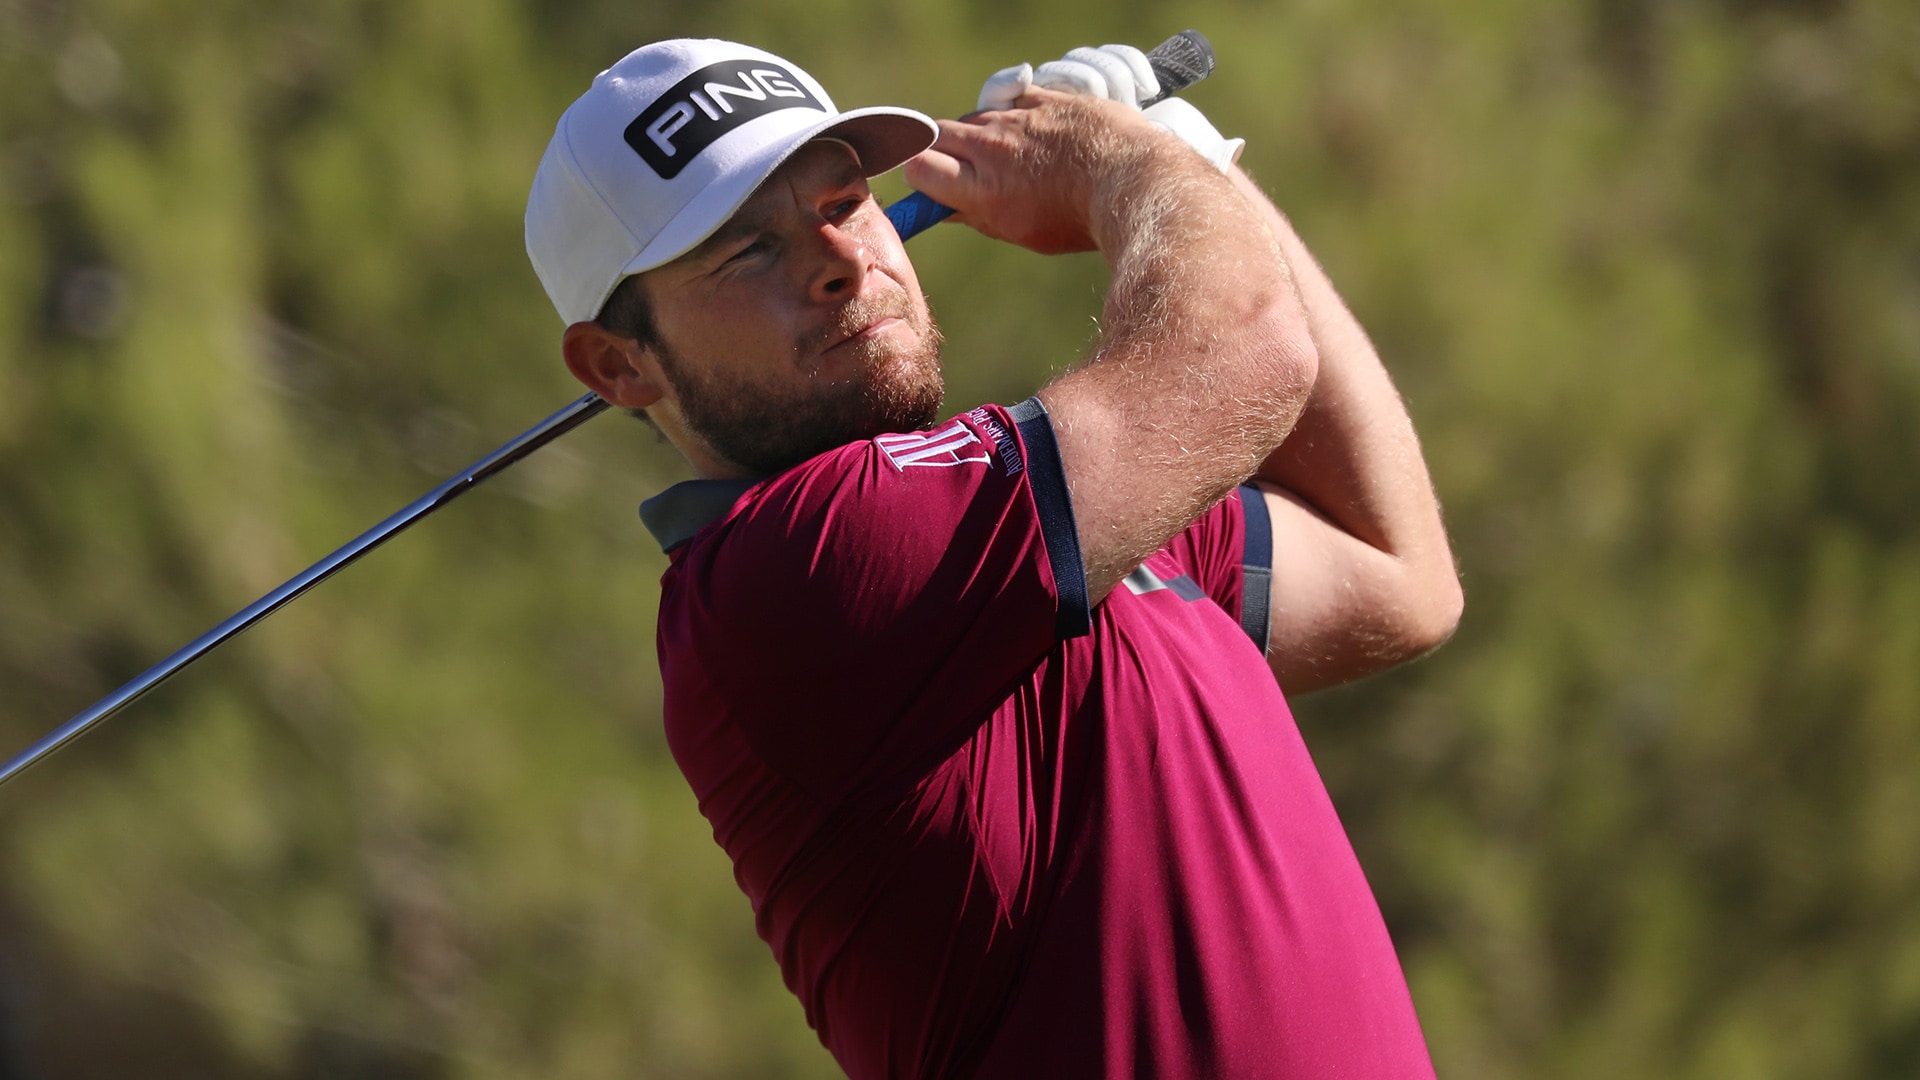 Tired and 'grumpy', Tyrrell Hatton fires opening 65 at CJ Cup 2